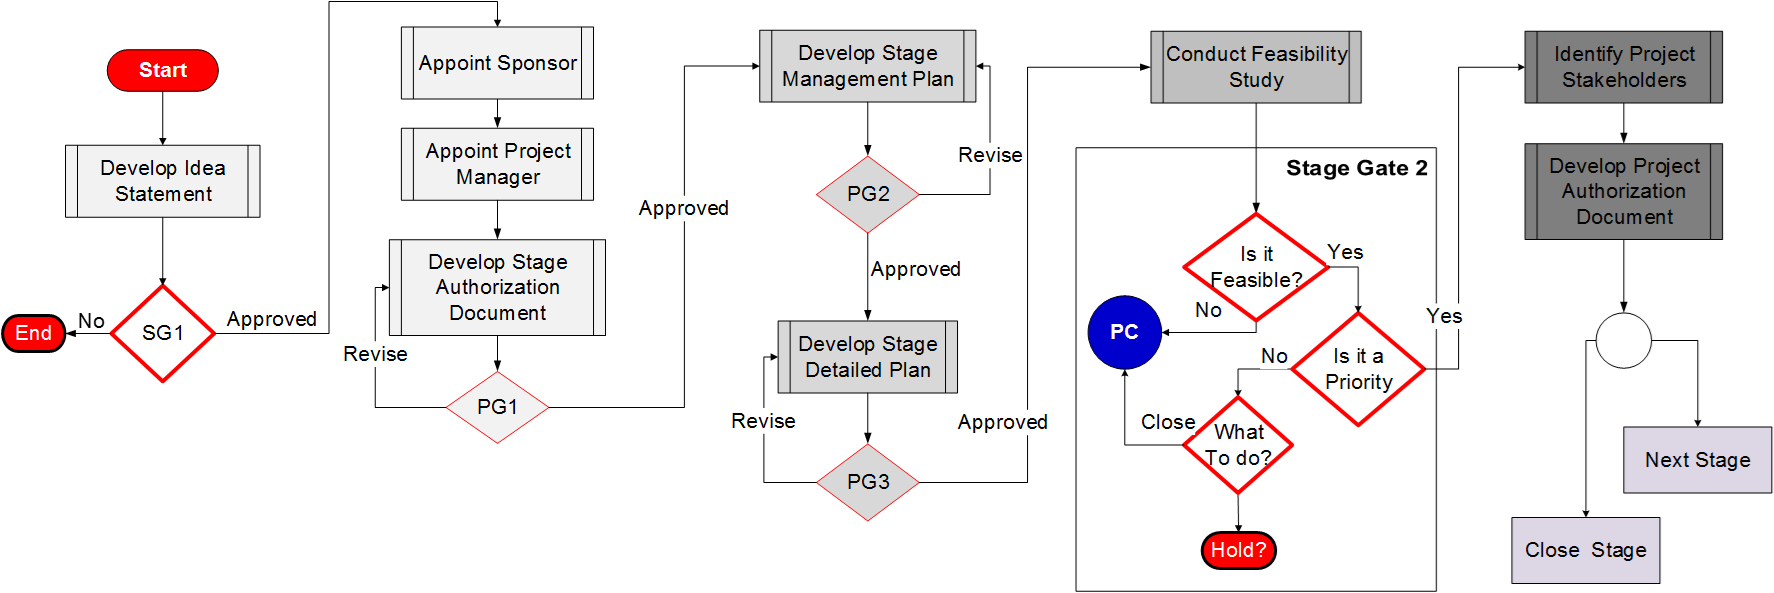 Sample high-level flowchart for a project discovery phase